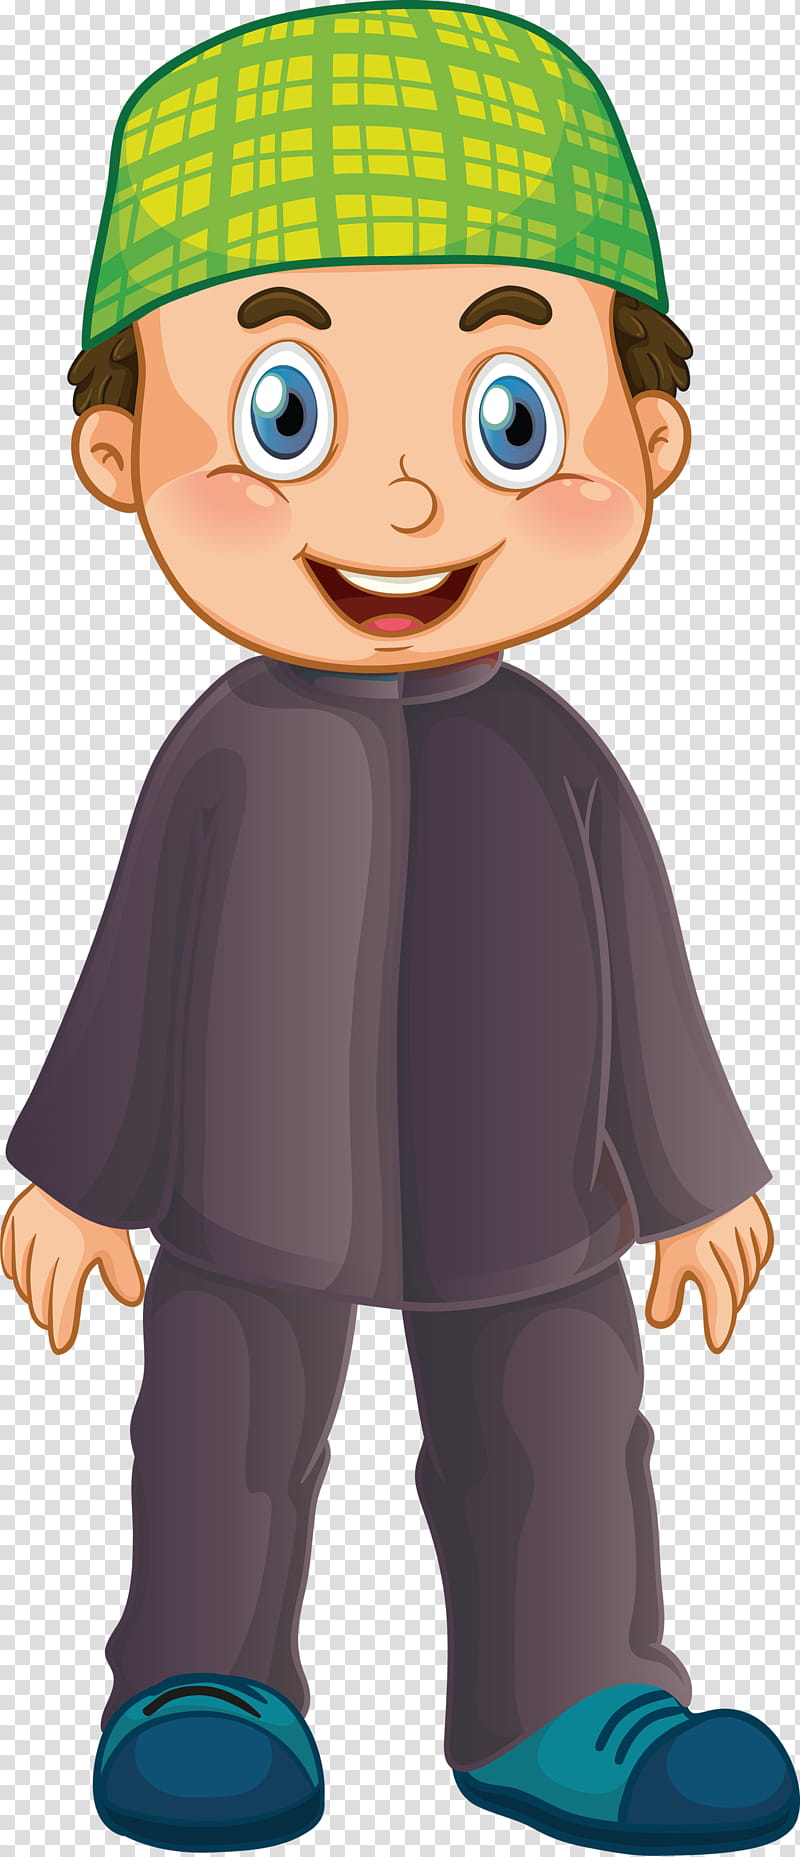 Muslim People, Cartoon, Animation, Gesture, Smile, Action Figure, Child, Style transparent background PNG clipart